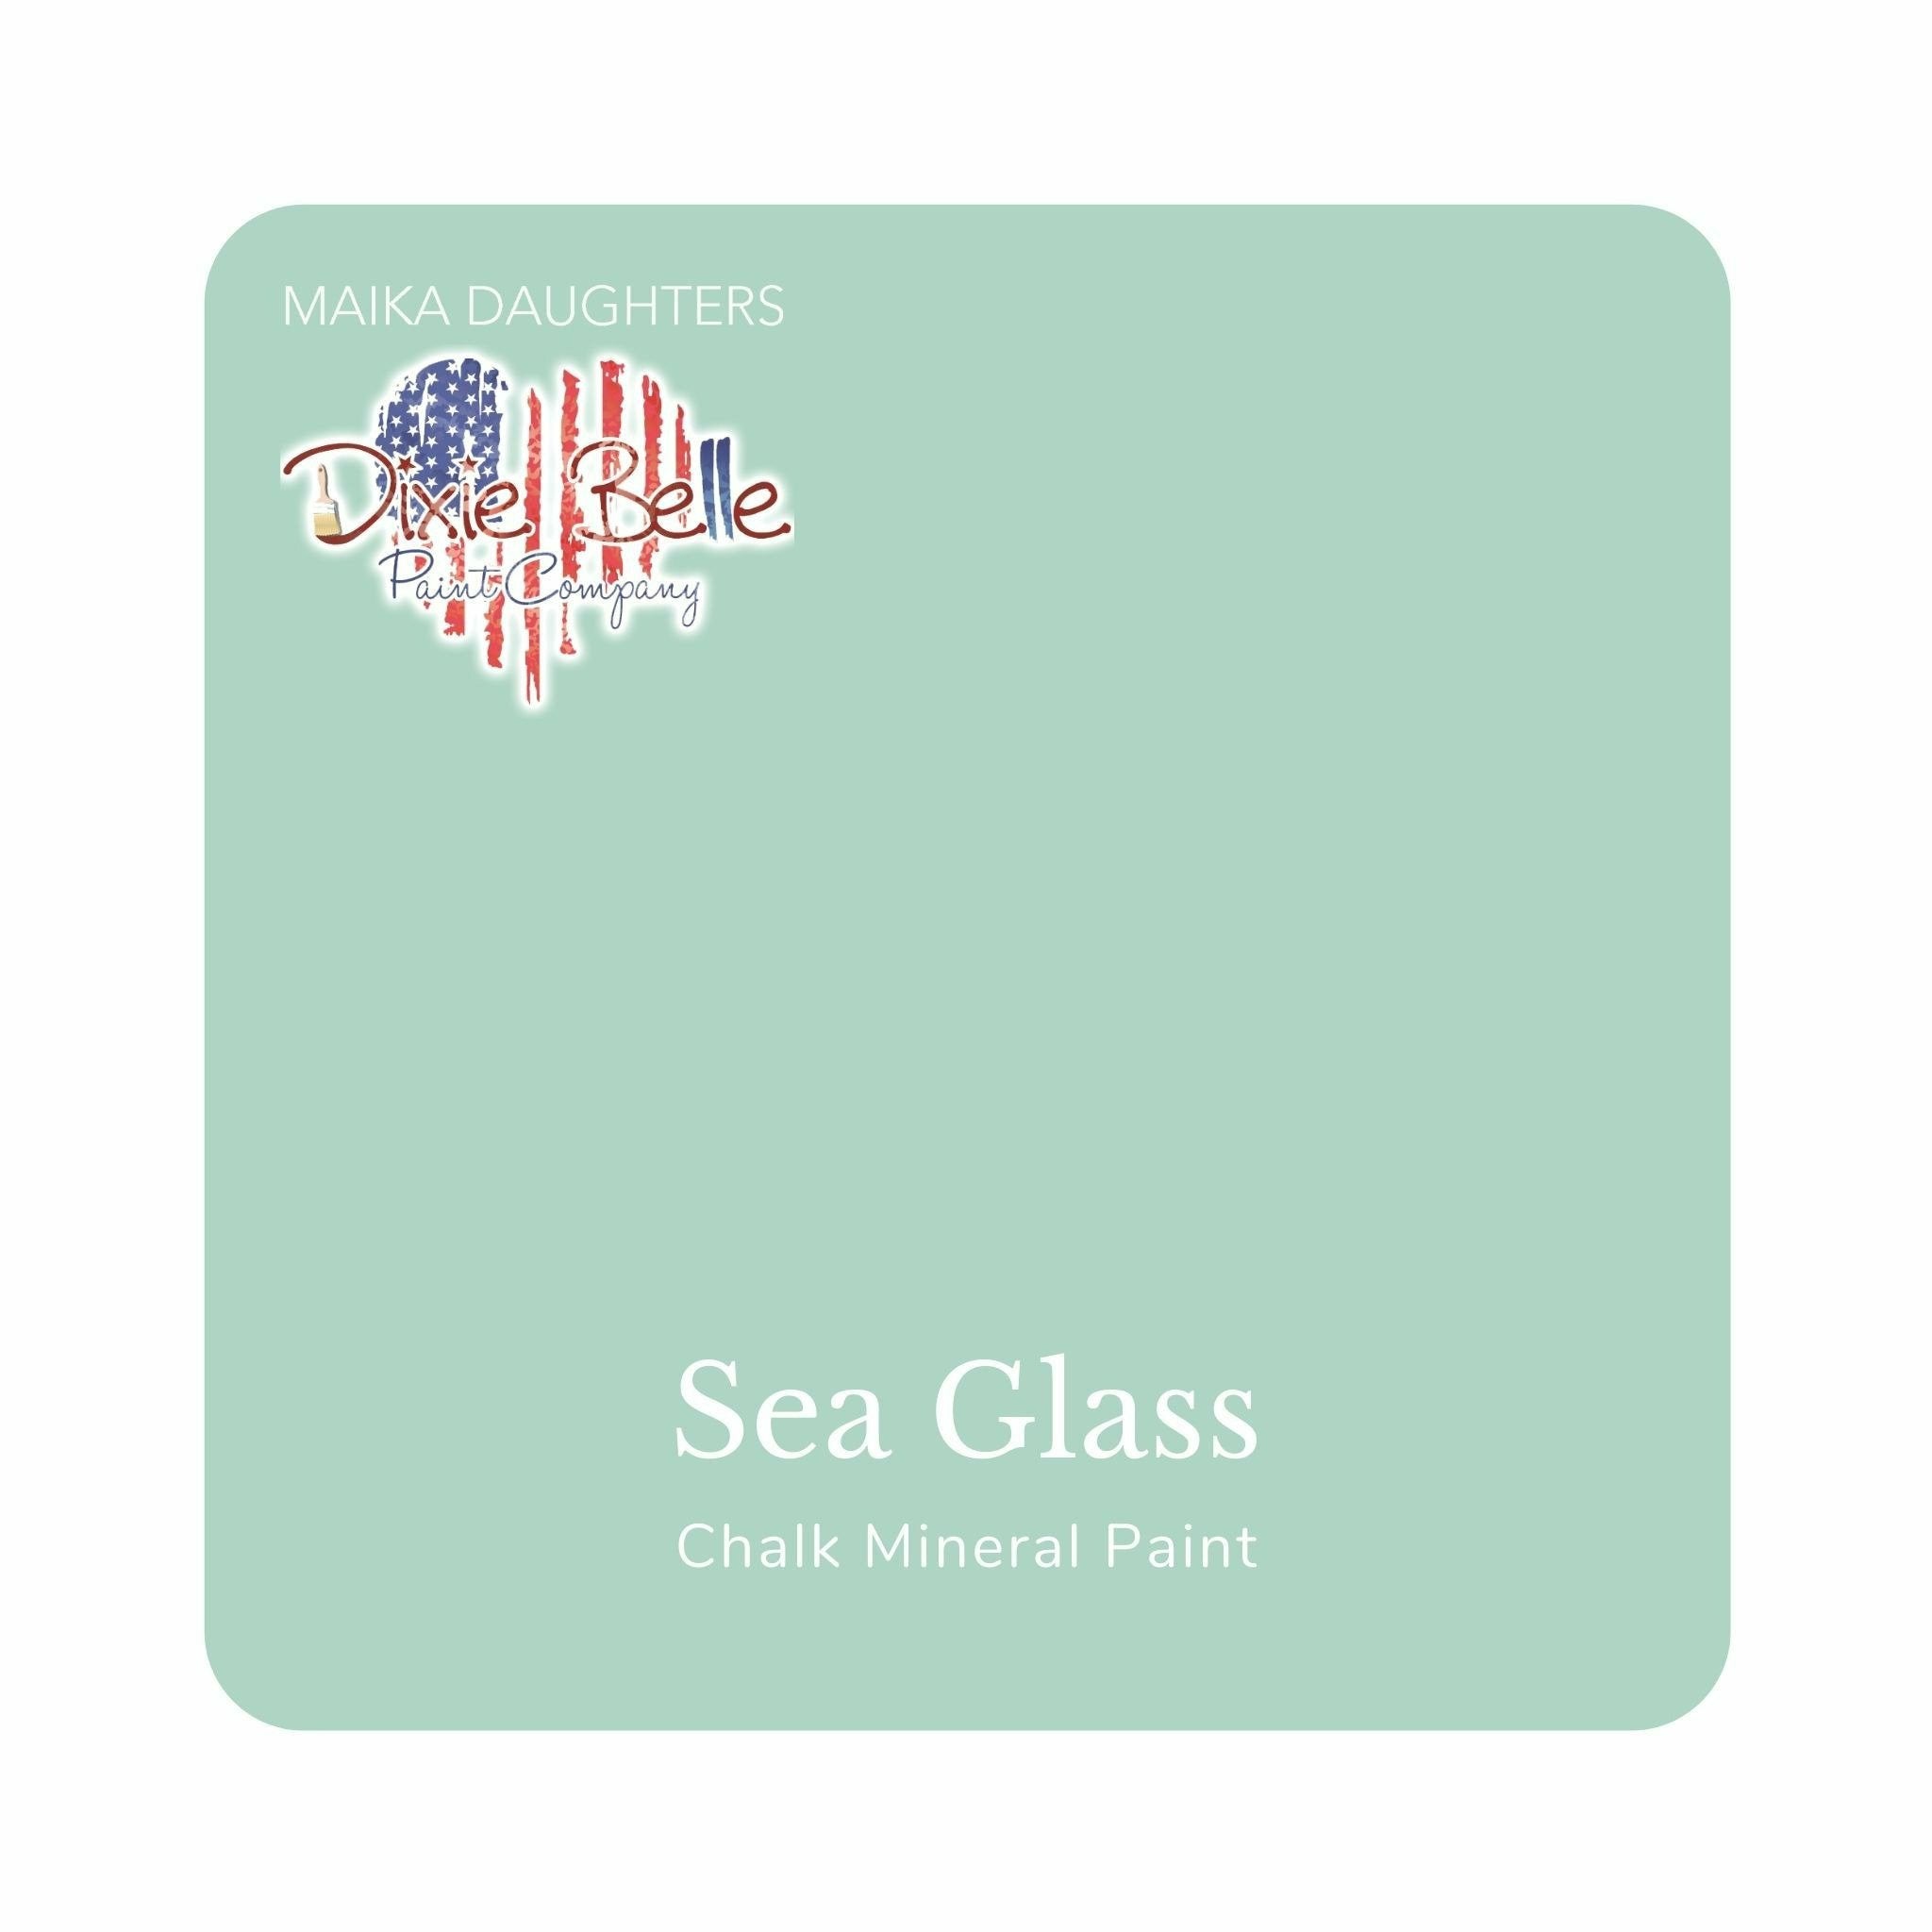 A square swatch card of Dixie Belle Paint Company’s Sea Glass Chalk Mineral Paint is against a white background. This color is a blue light gray.